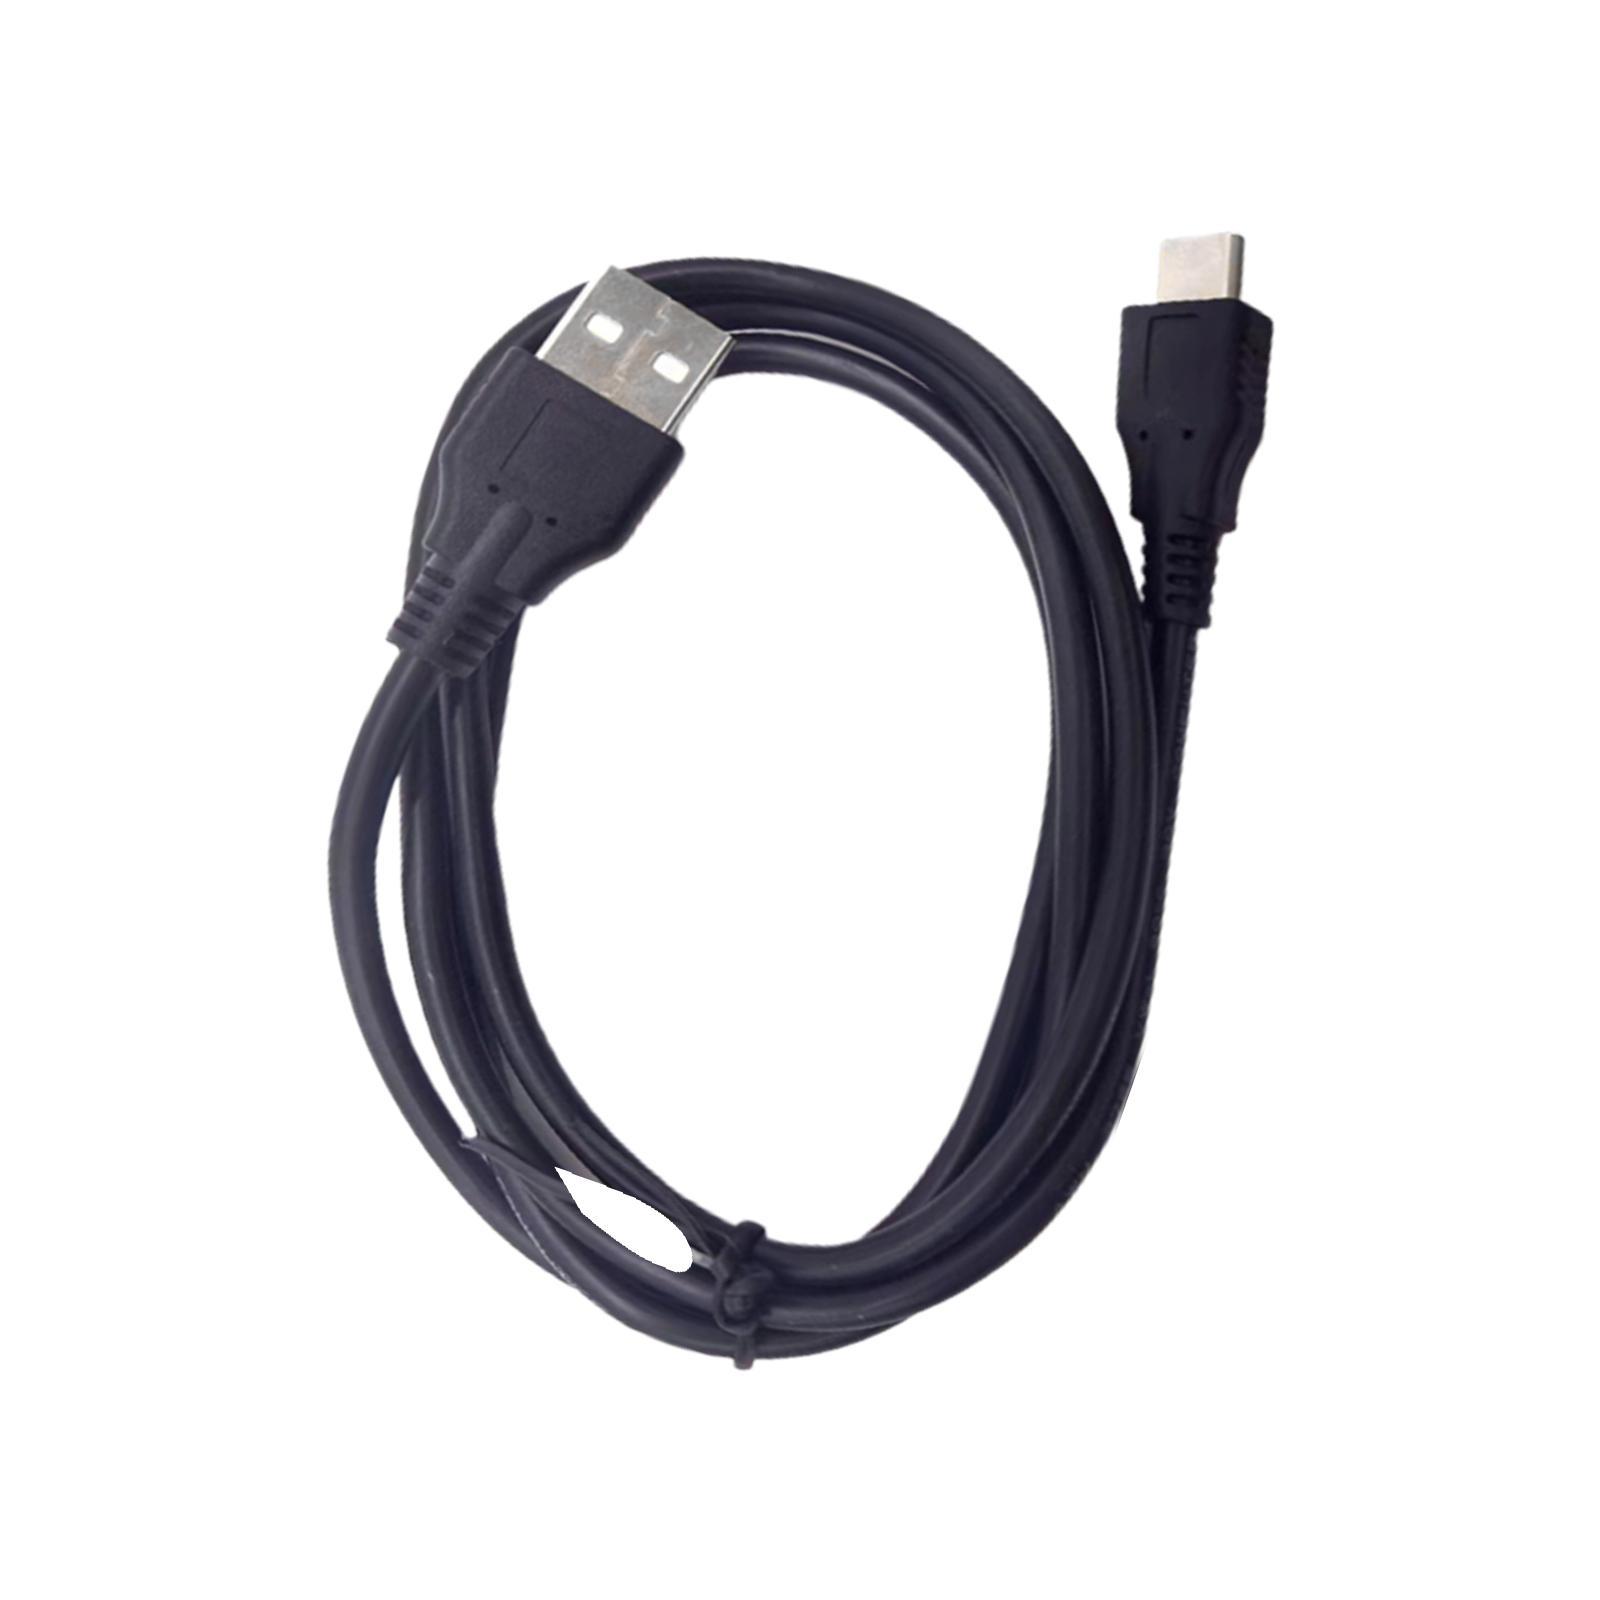 Camera USB Cable Cord/ USB Charging Cable/ Professional Black Portable High Quality Data Cable/ Photo Transfer Cable for Z6 Z7 Uc- Accessory